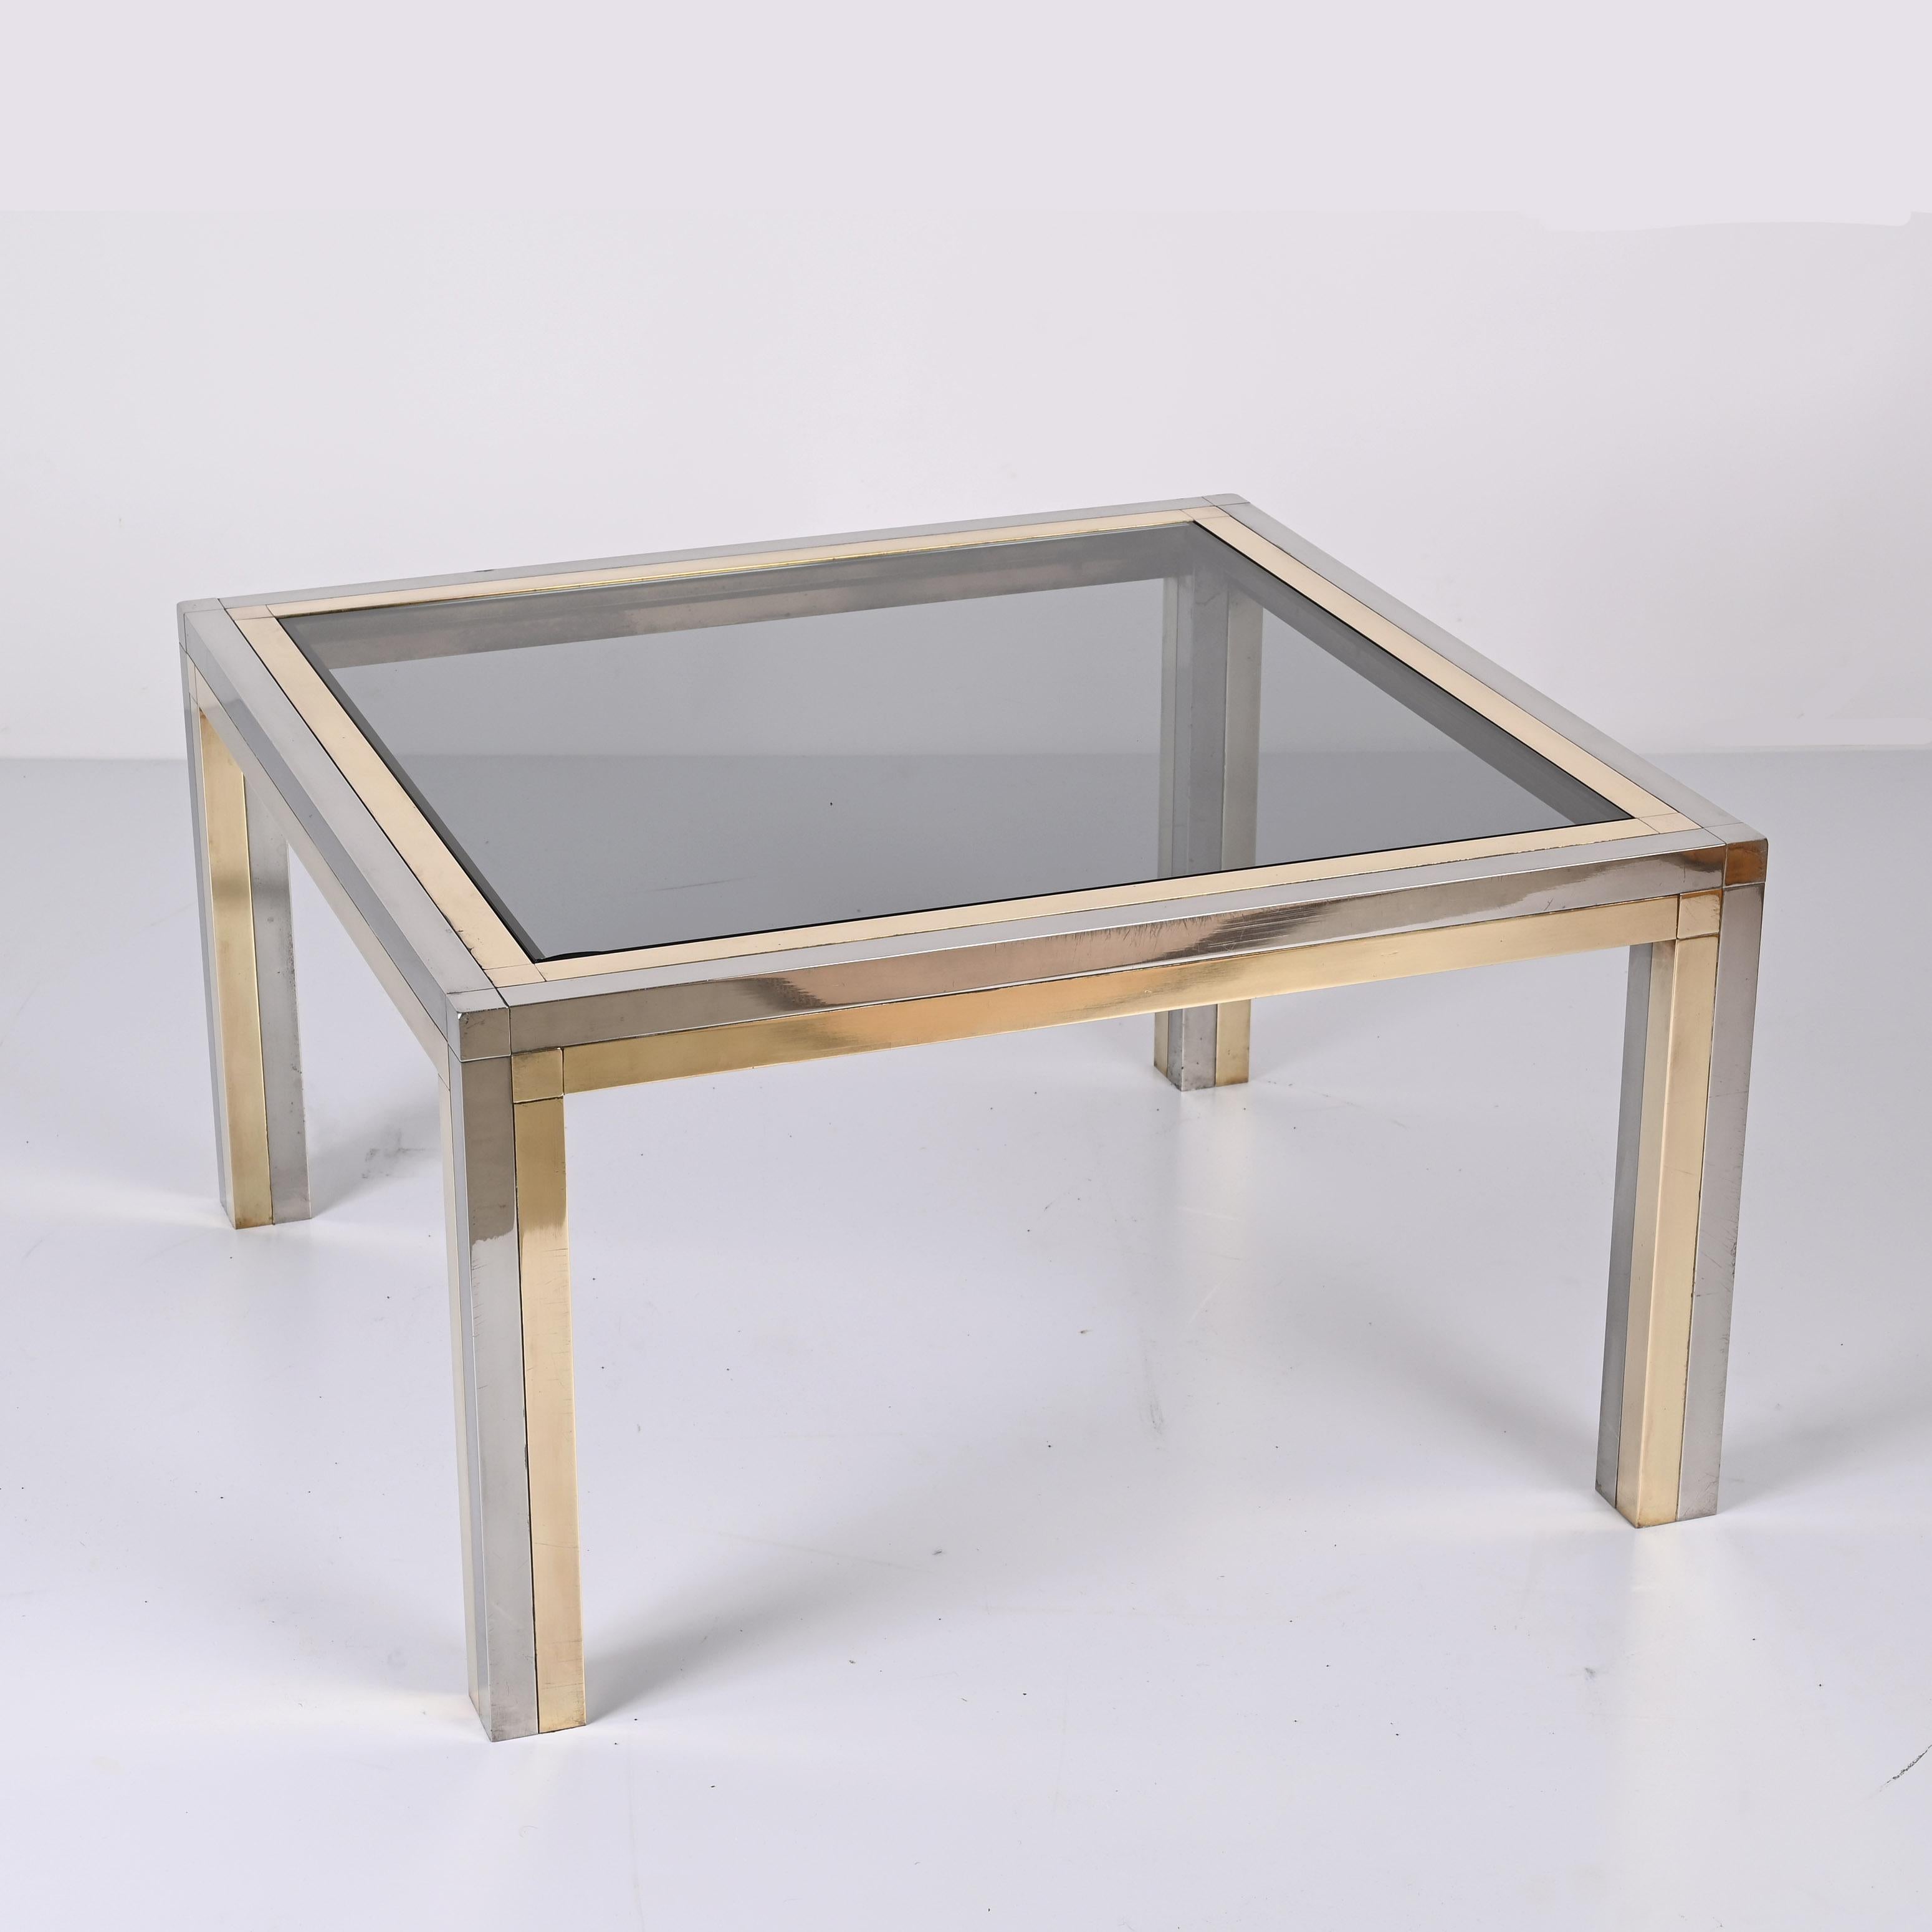 Romeo Rega Brass, Chrome and Smoked Glass Square Italian Coffee Table, 1970s For Sale 4